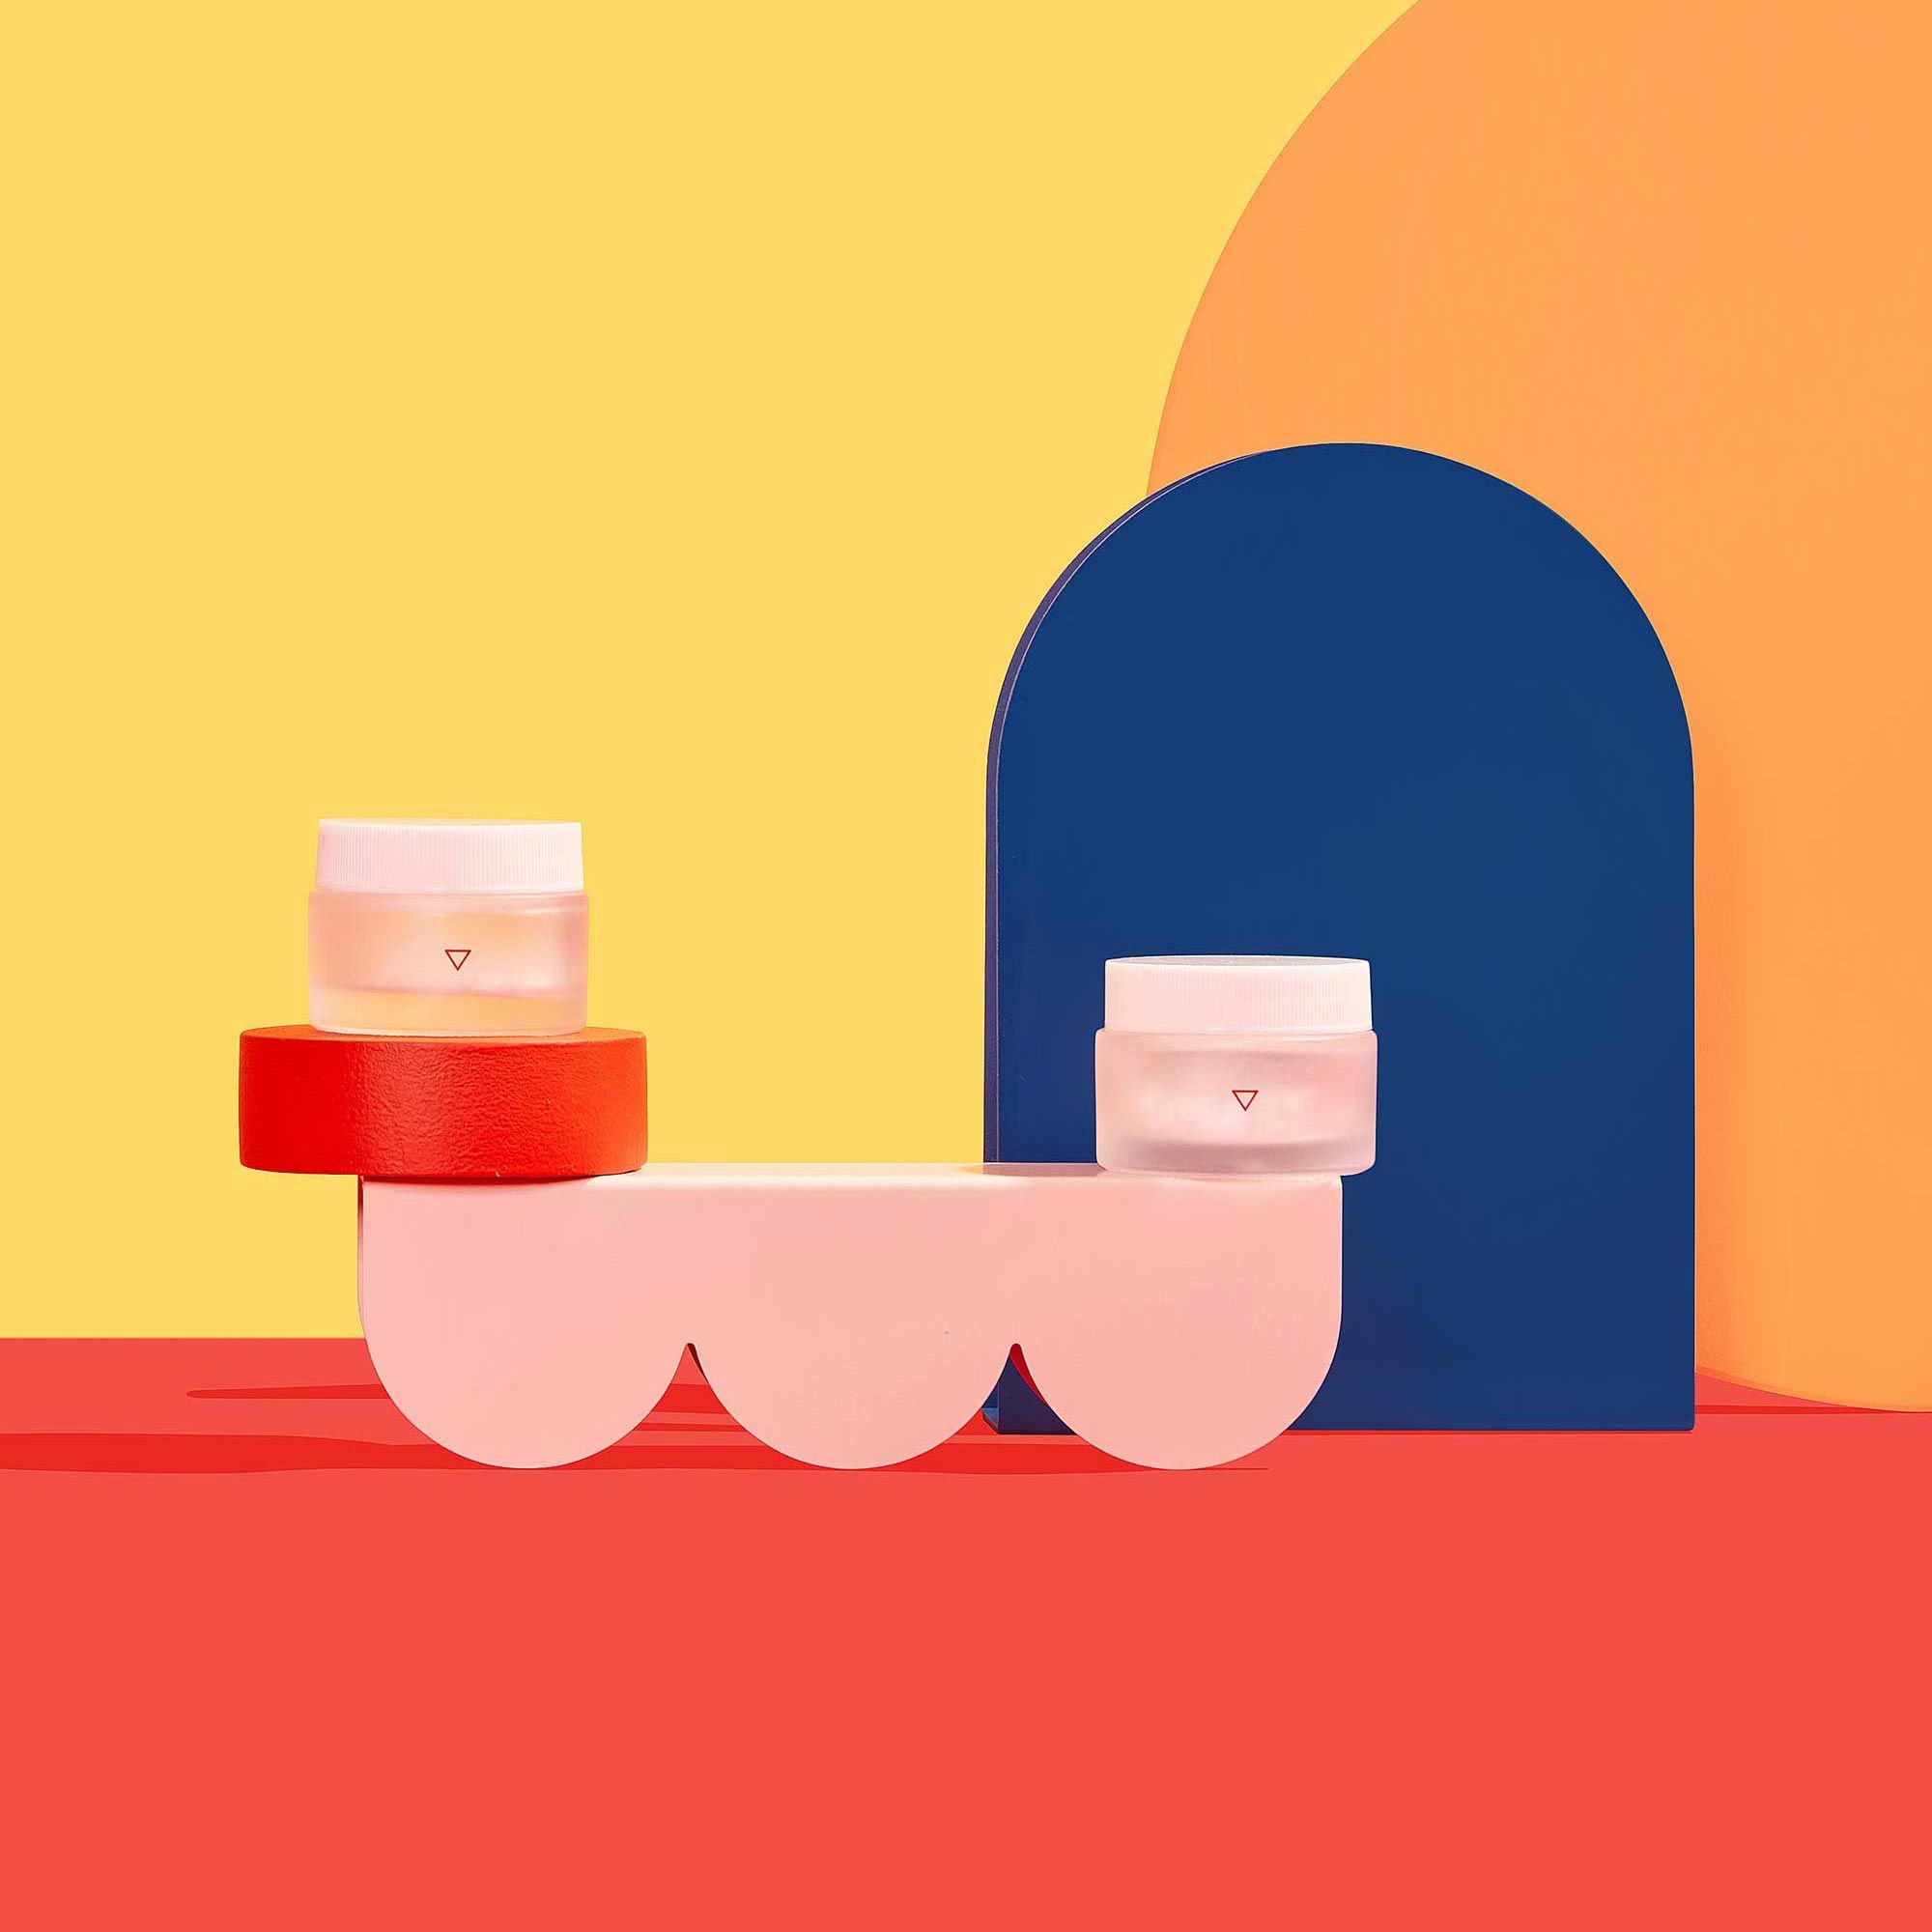 pill bottles on red and yellow background with colorful geometric shapes